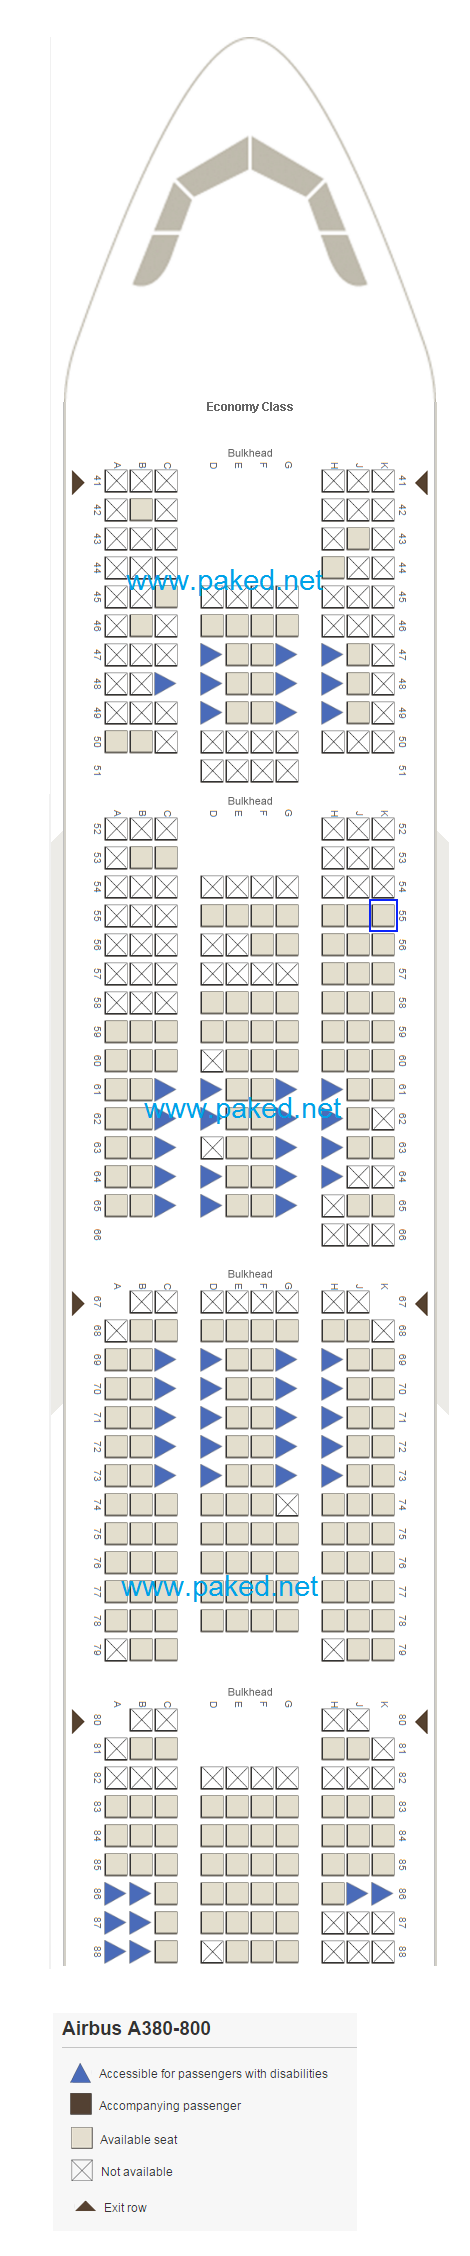 seat map a380 emirates